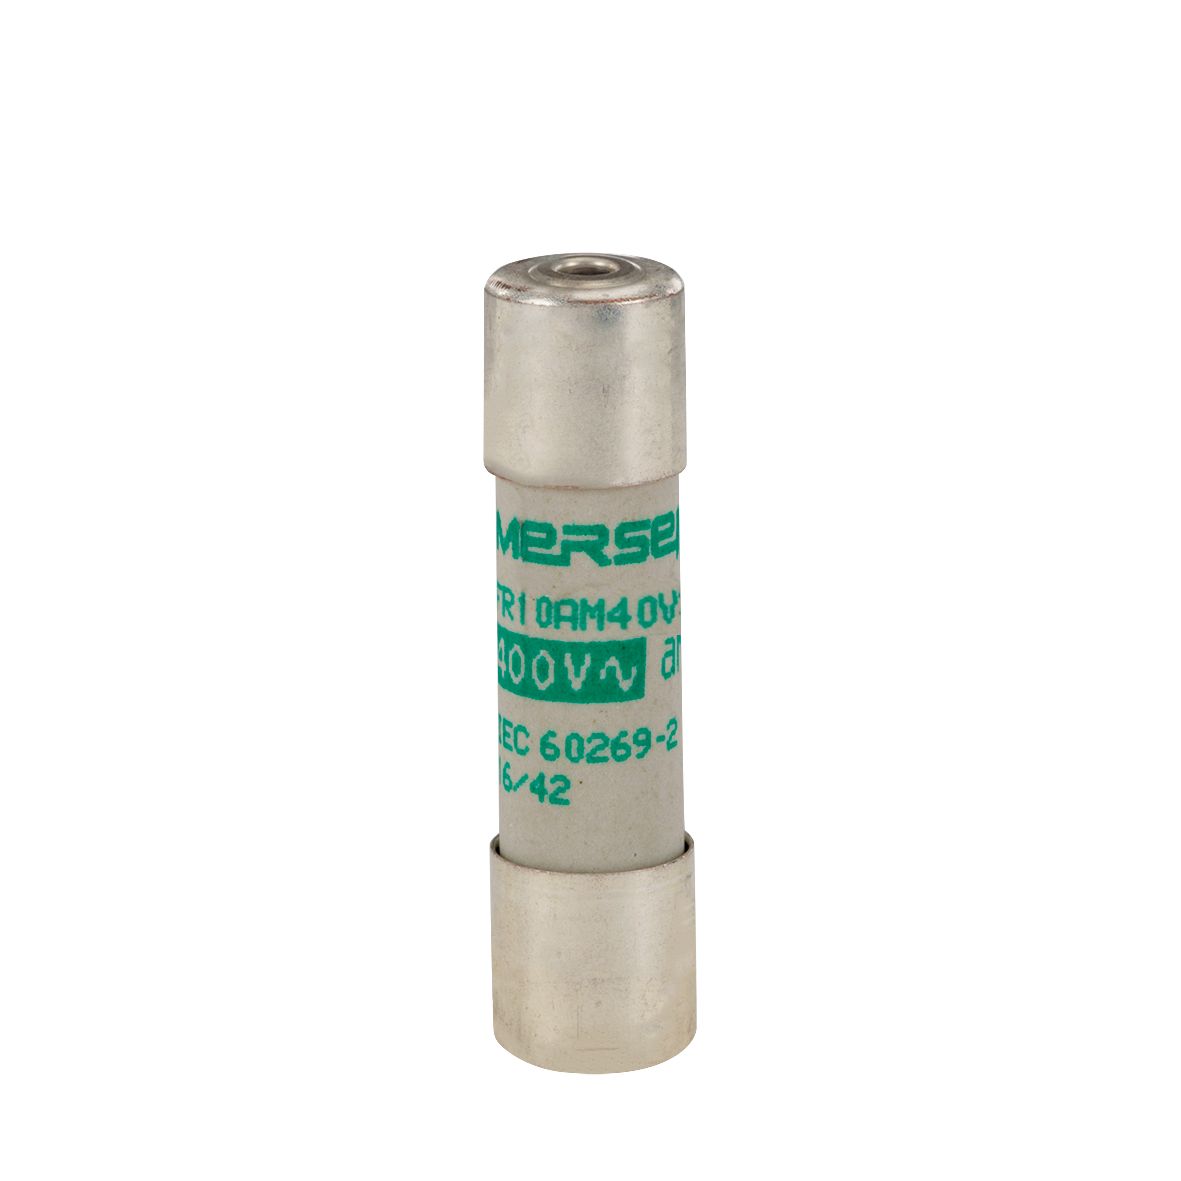 Z084984 - Cylindrical fuse-link aM 400VAC 10.3x38, 2A with striker